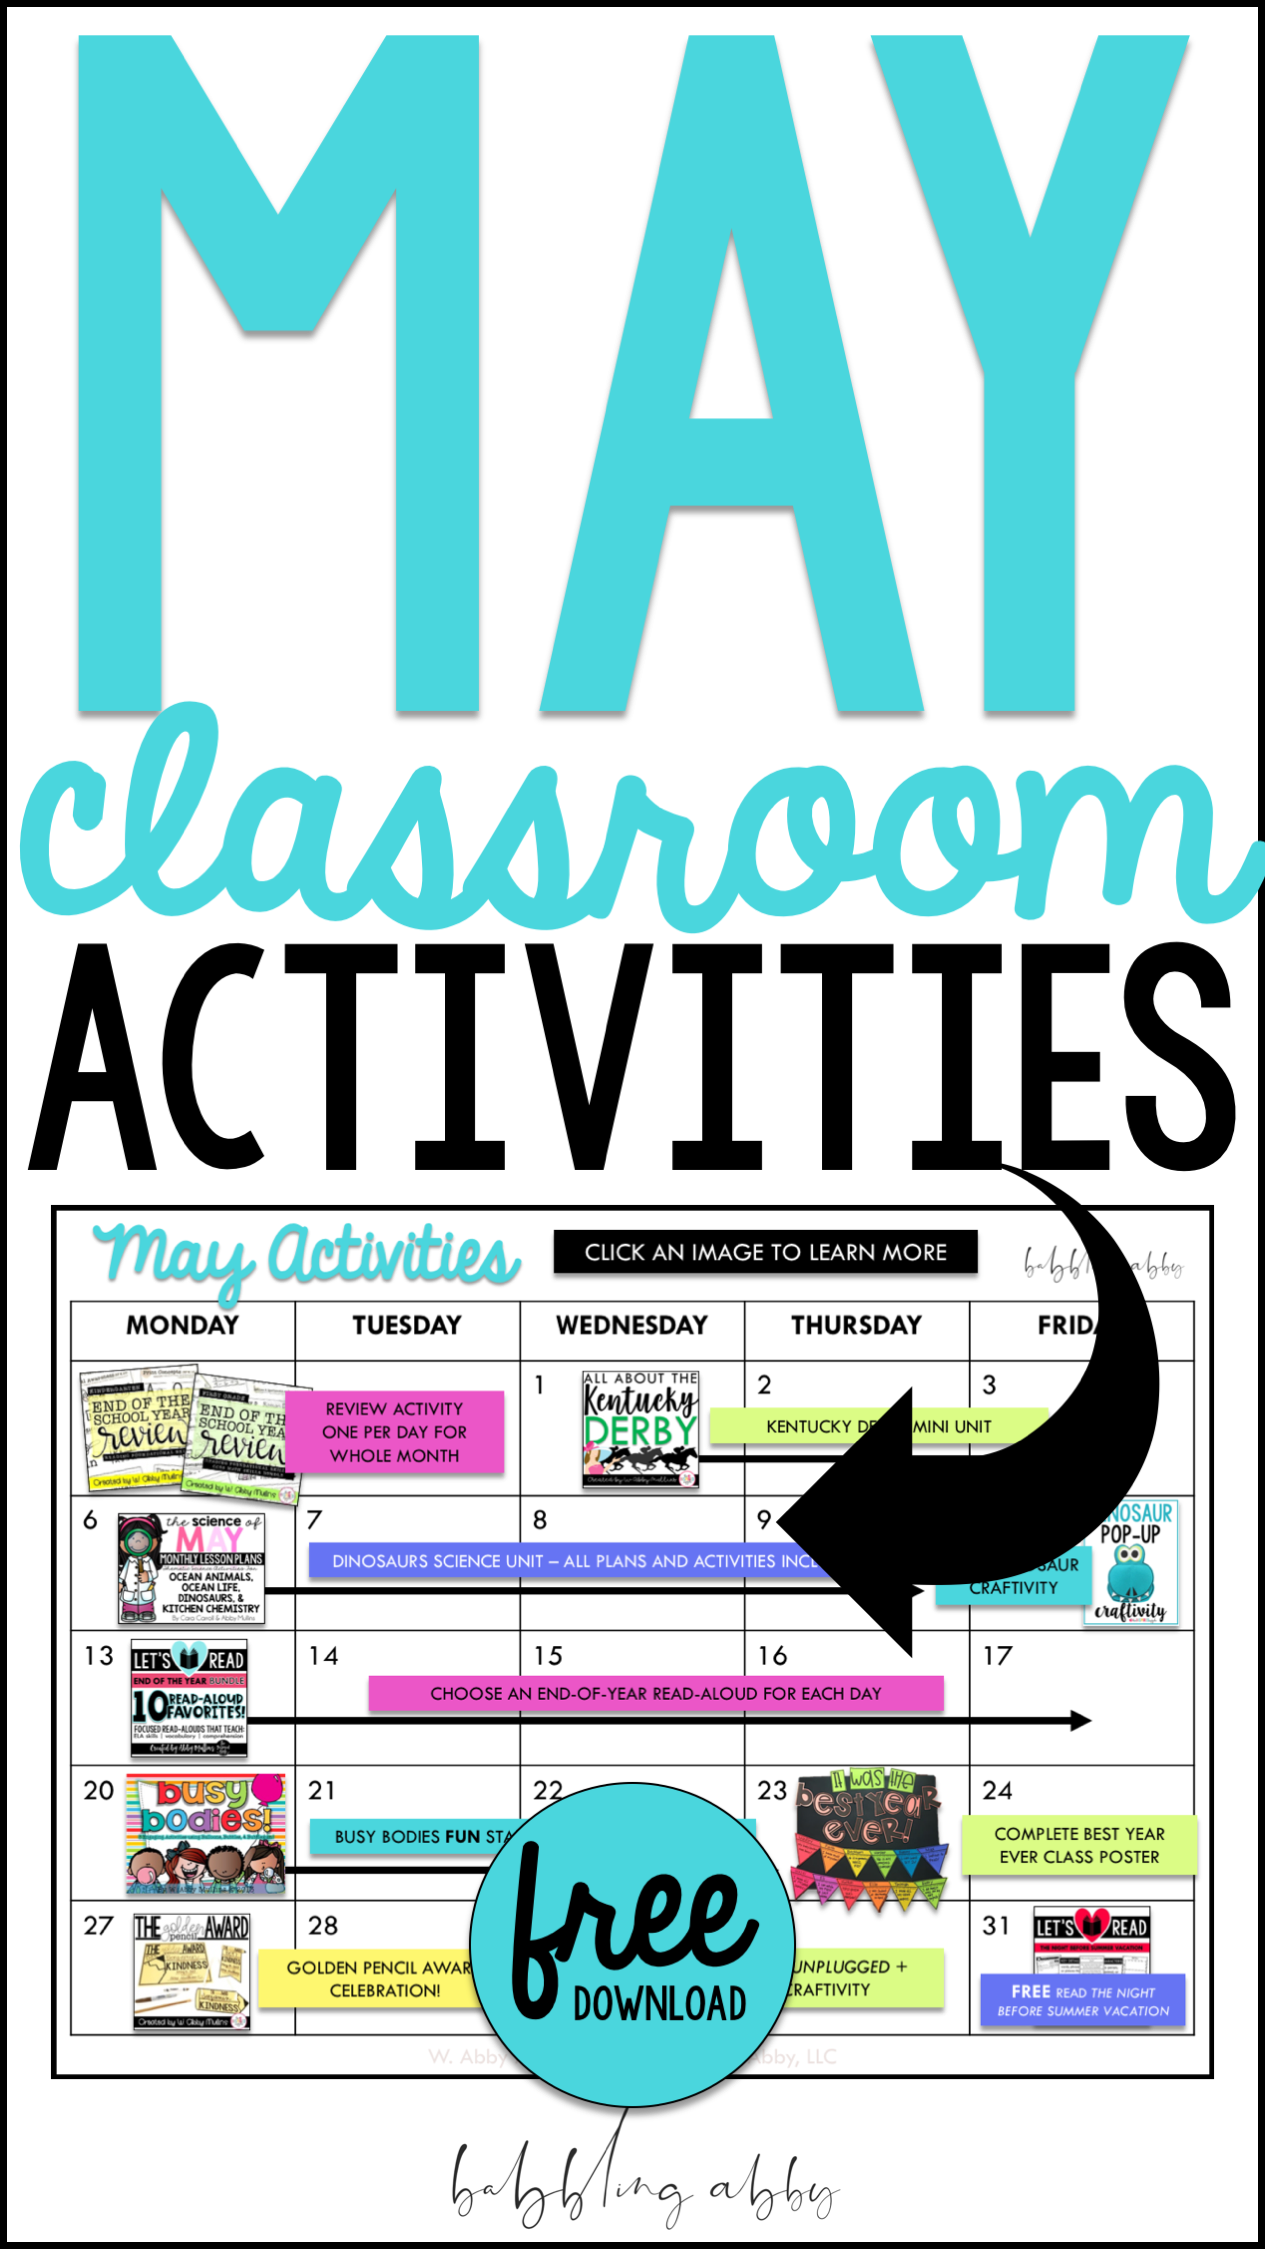 These activities for May will be perfect for your classroom as you wrap up the school year! There are fun ideas, free printables, book suggestions, literacy activities, end of the year awards, and so much more! Download the free planning calendar today to use in your kindergarten, first grade, or second grade classroom! #school #endoftheyear #freeprintables #may #classroom #activities #ideas #dinosaurs #review #math #babblingabby #theinspiredapple